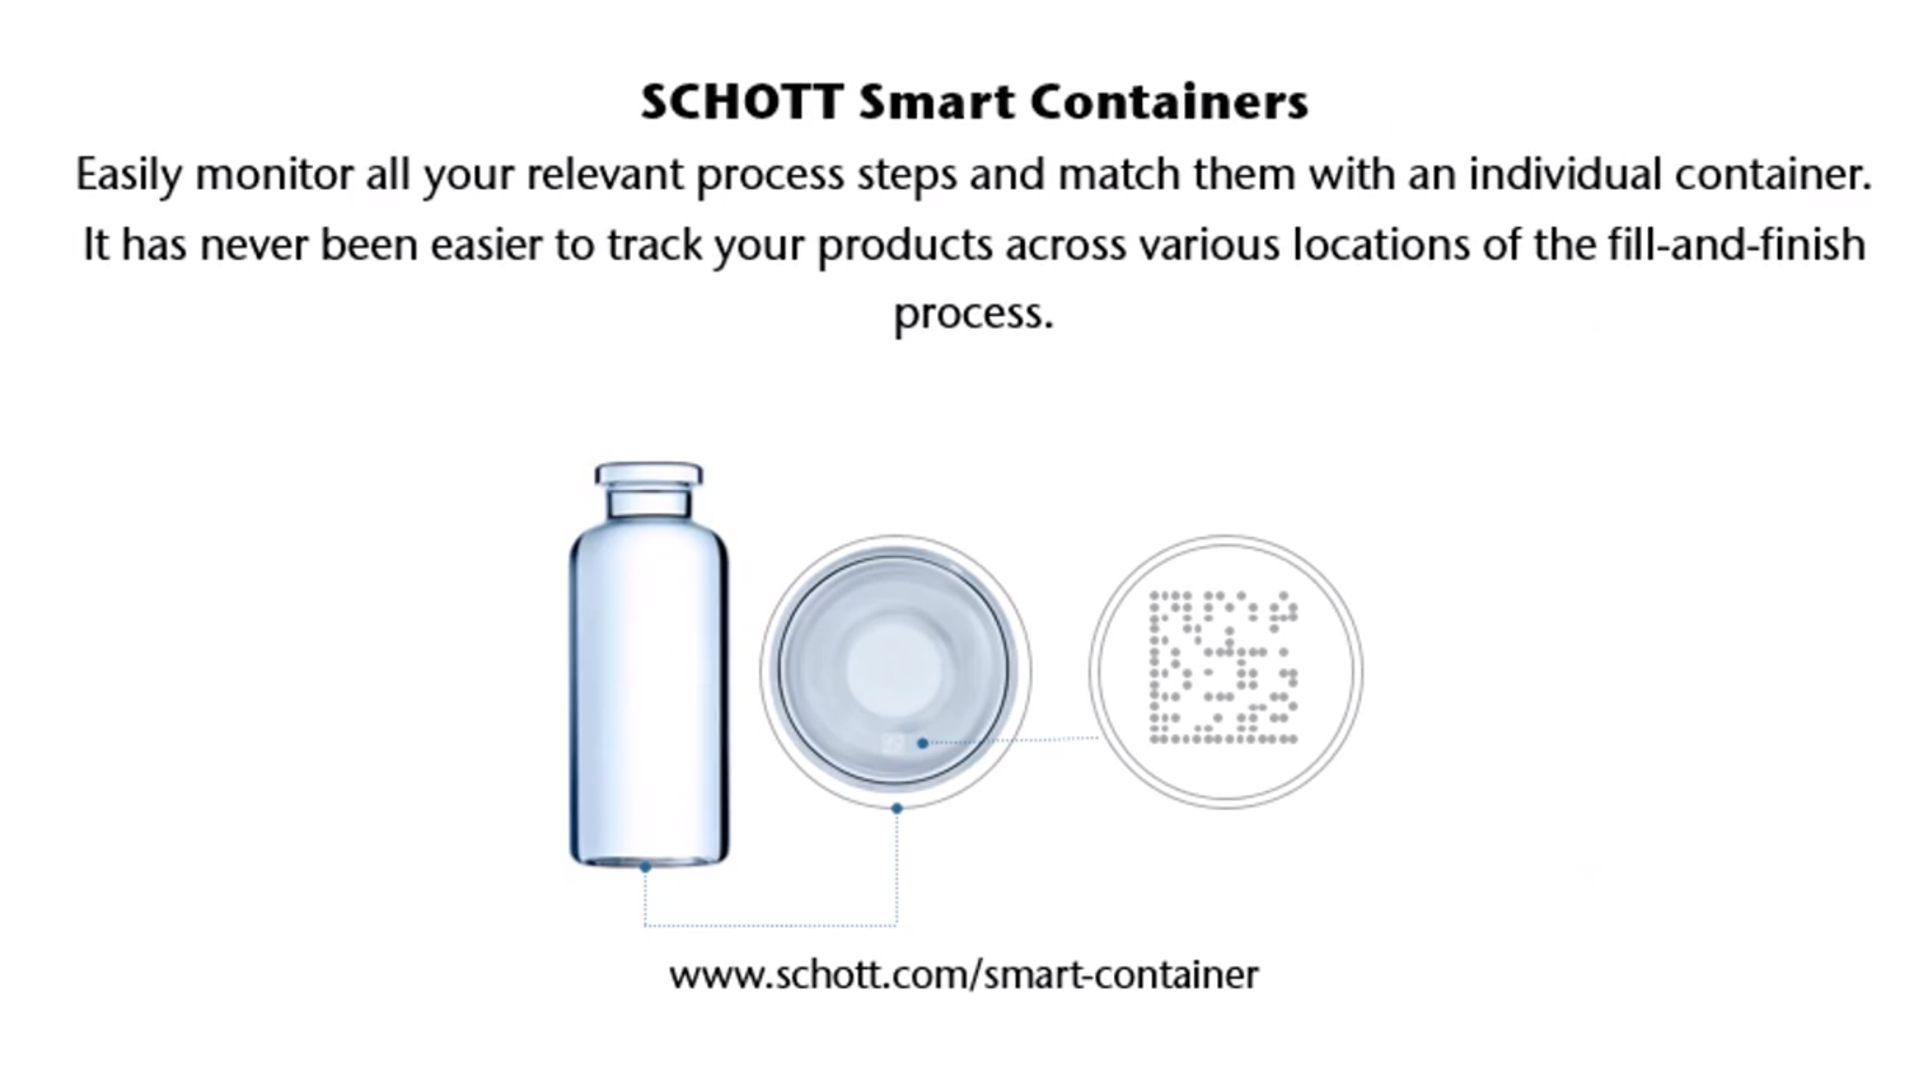 Video showing how SCHOTT Smart Containers reduce the risk of mix-ups